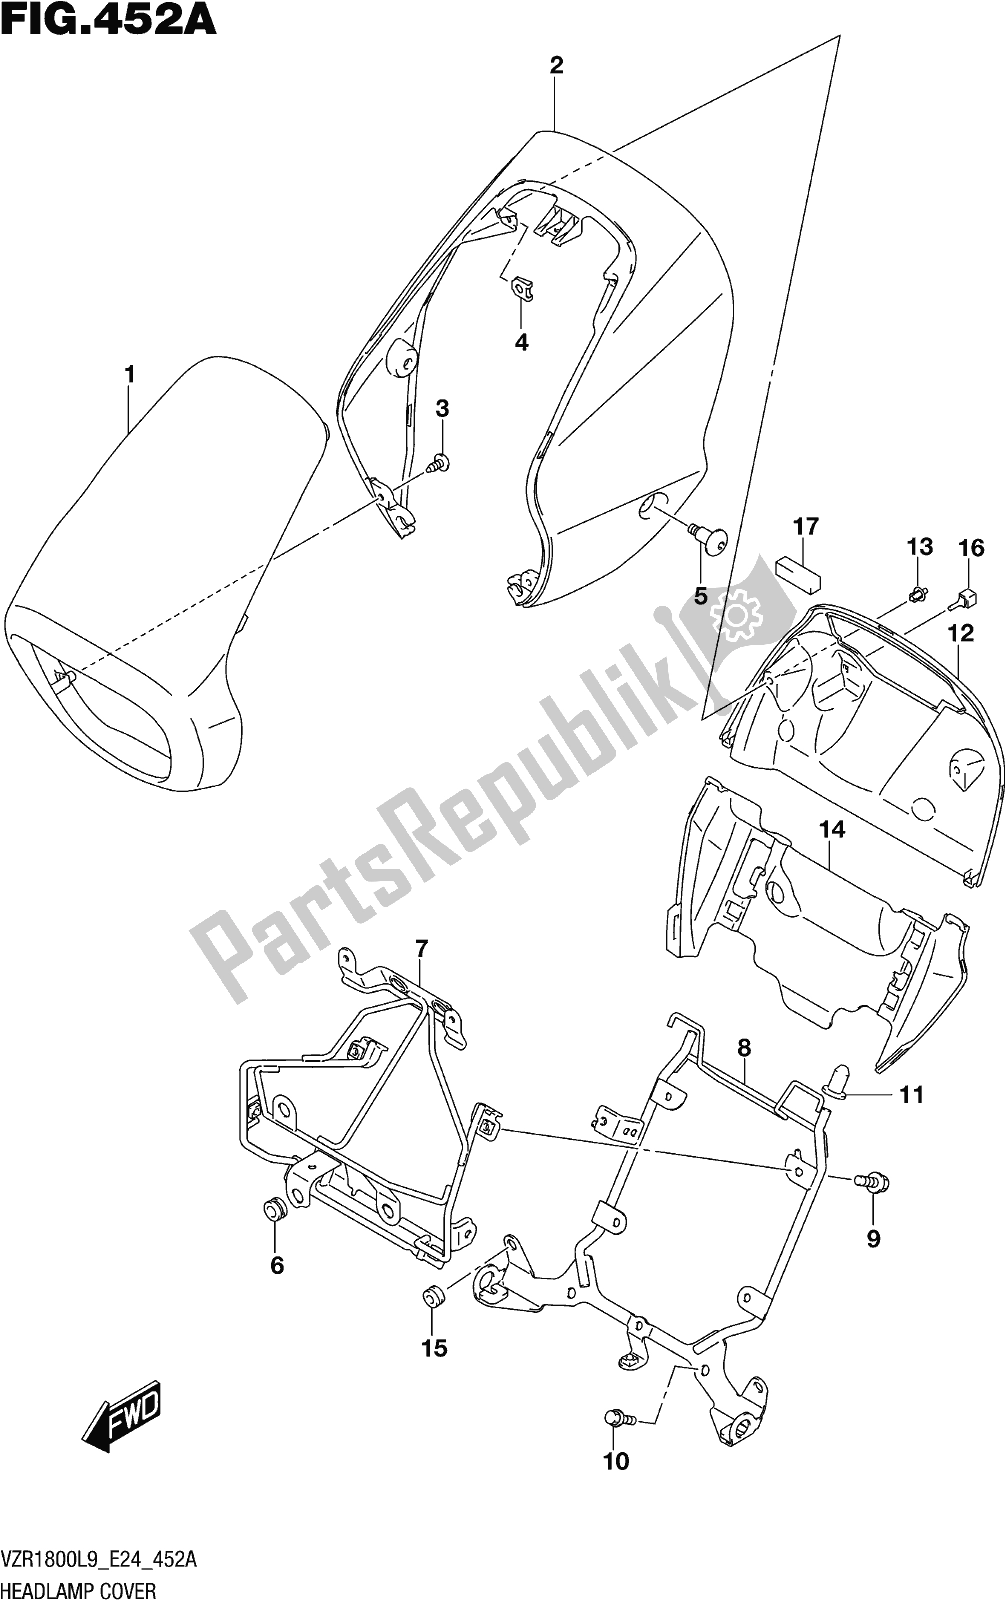 All parts for the Fig. 452a Headlamp Cover (vzr1800l9 E24) of the Suzuki VZR 1800 2019